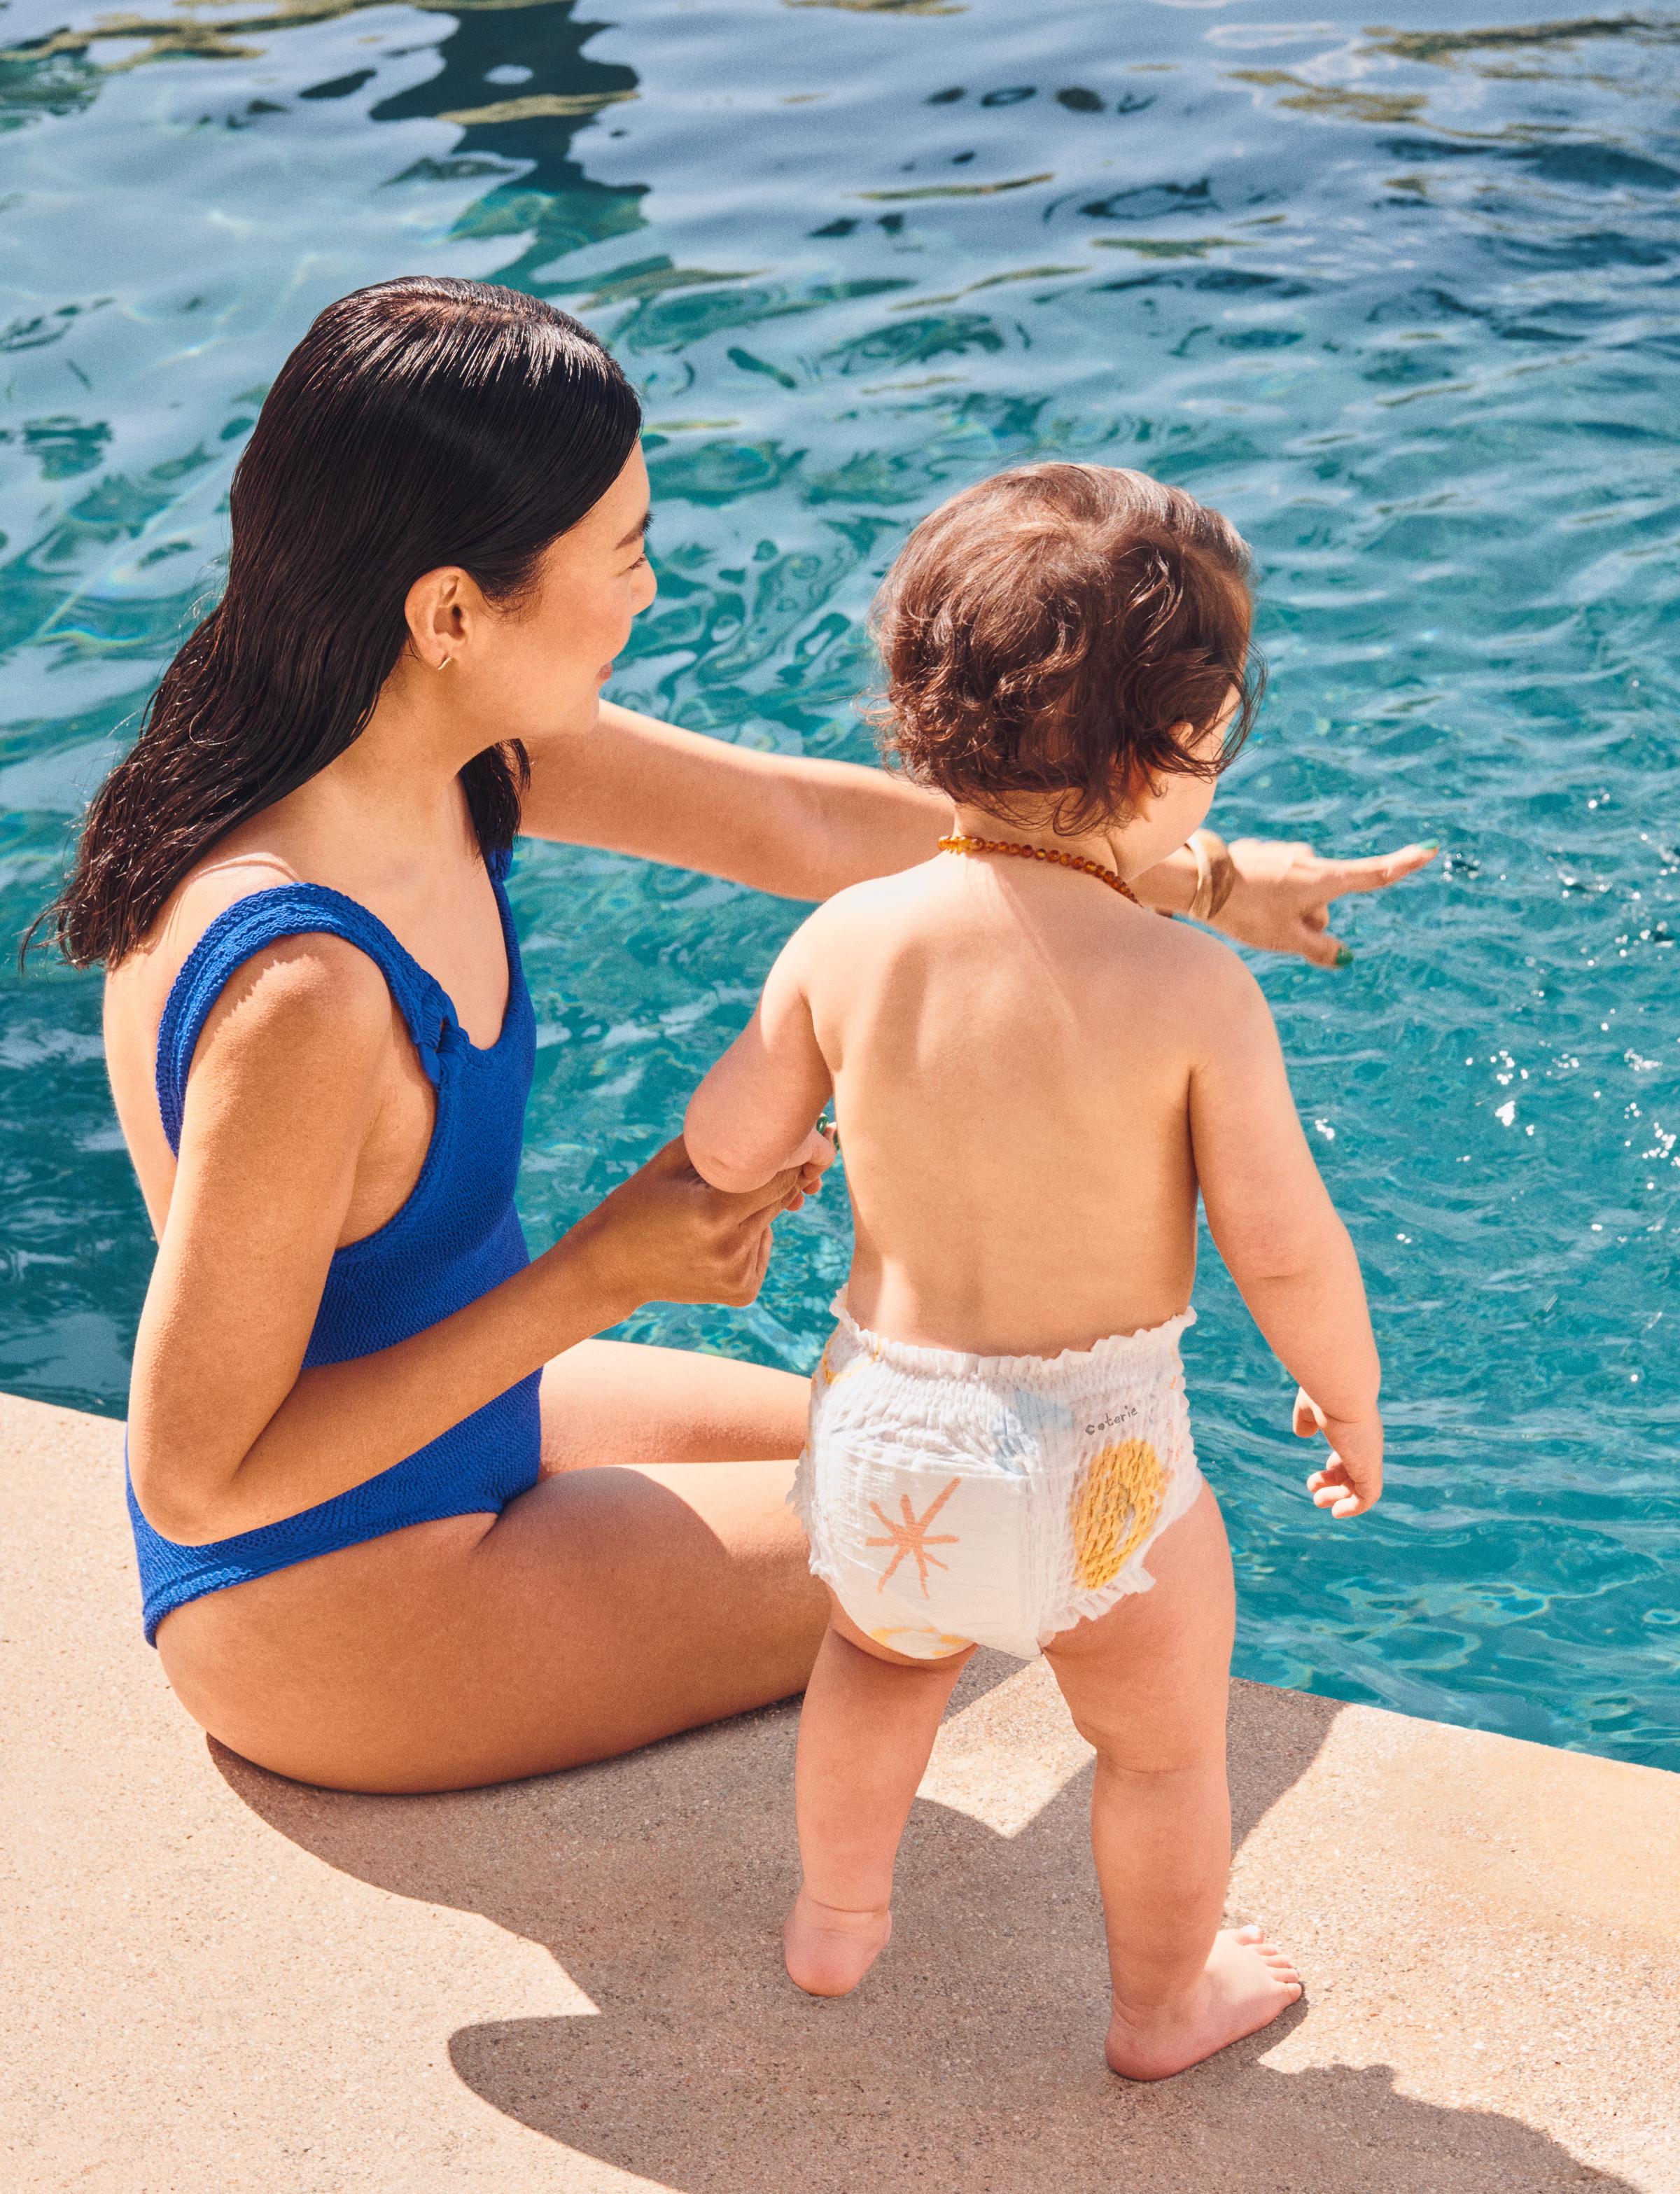 A woman and baby by a pool